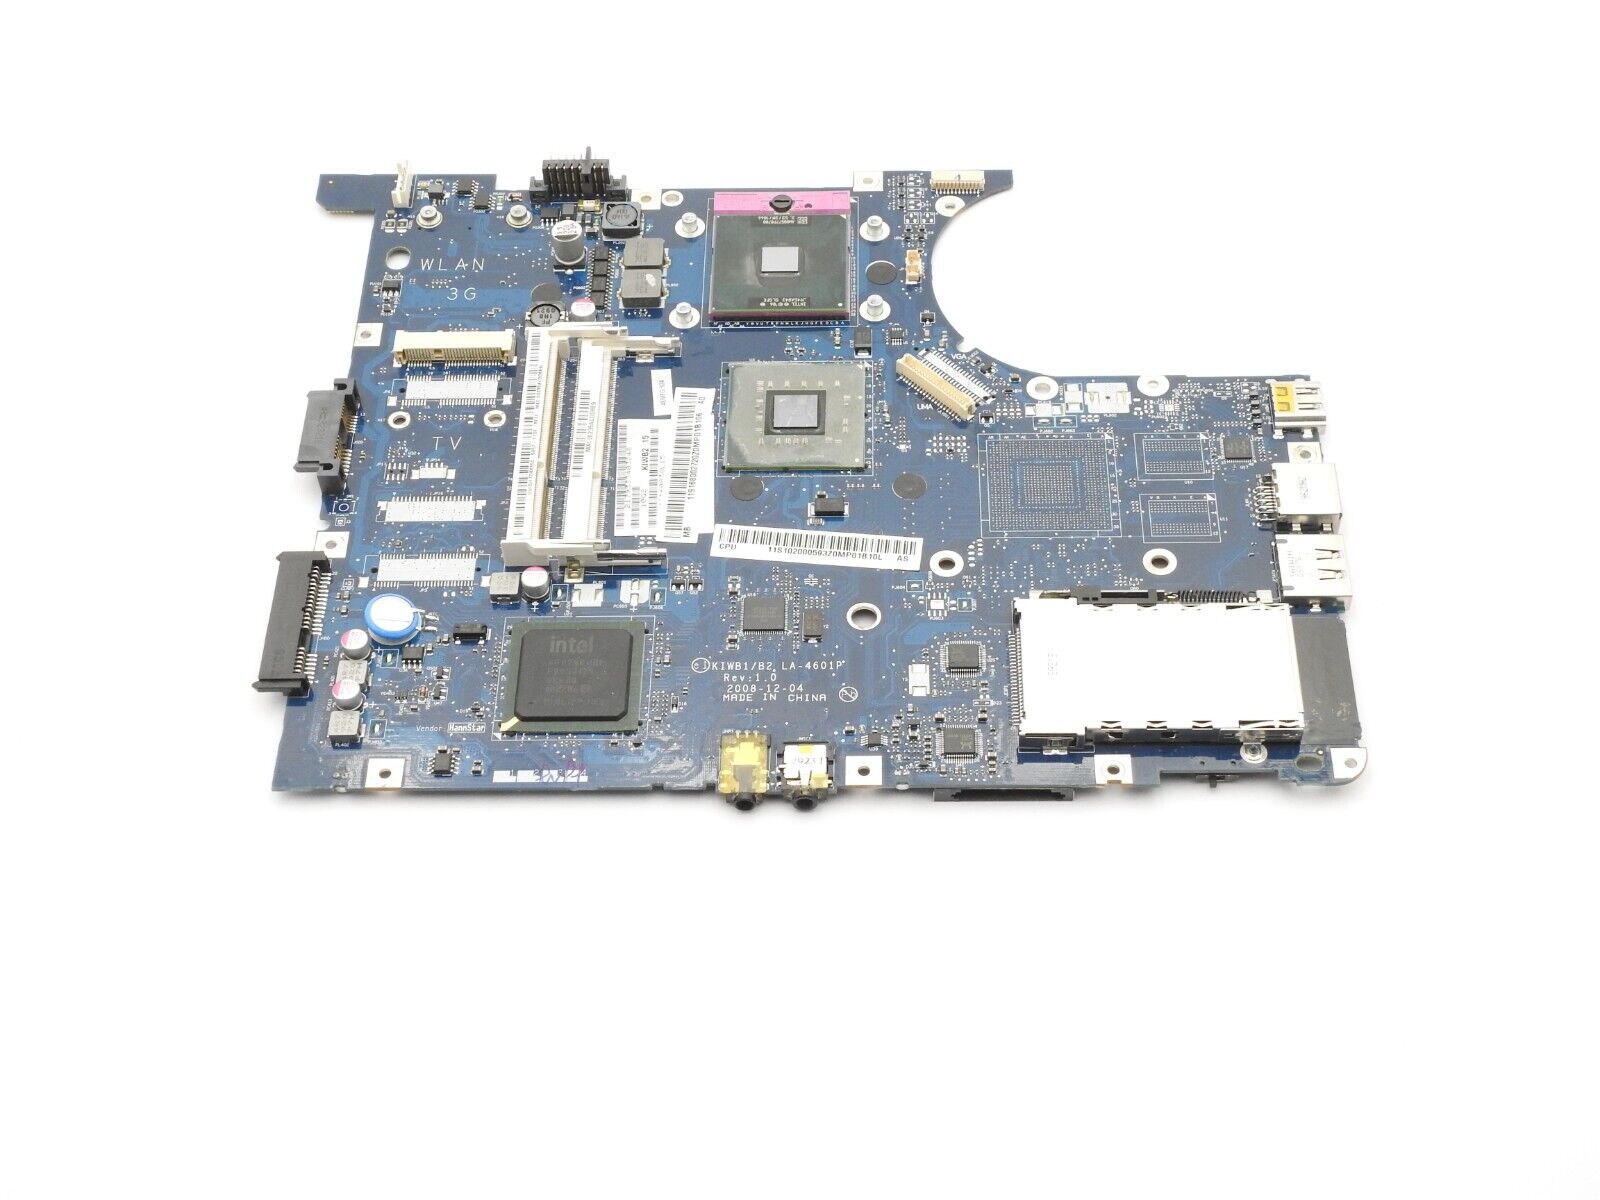 LENOVO IDEAPAD Y550 OEM MOTHERBOARD + INTEL P8700 2.53GHz CPU TESTED GRADE A